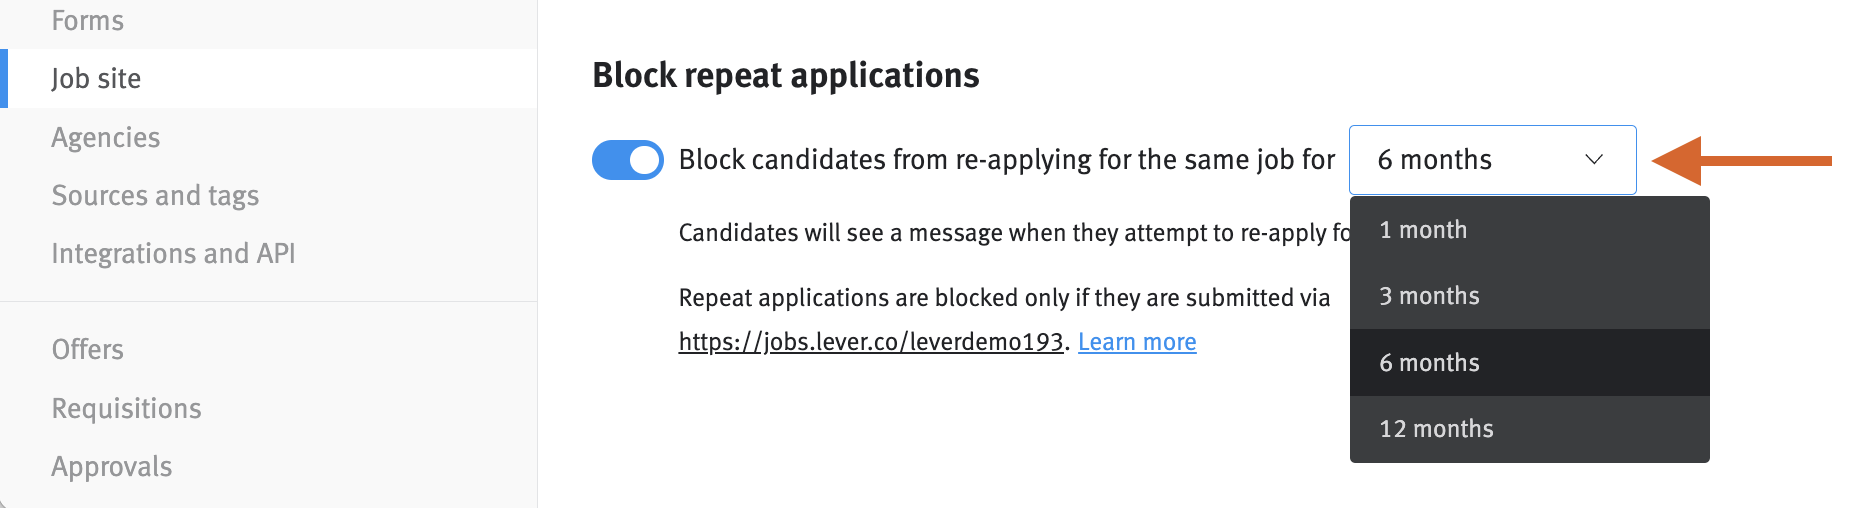 Block repeat applicants section with arrow pointing to dropdown menu.